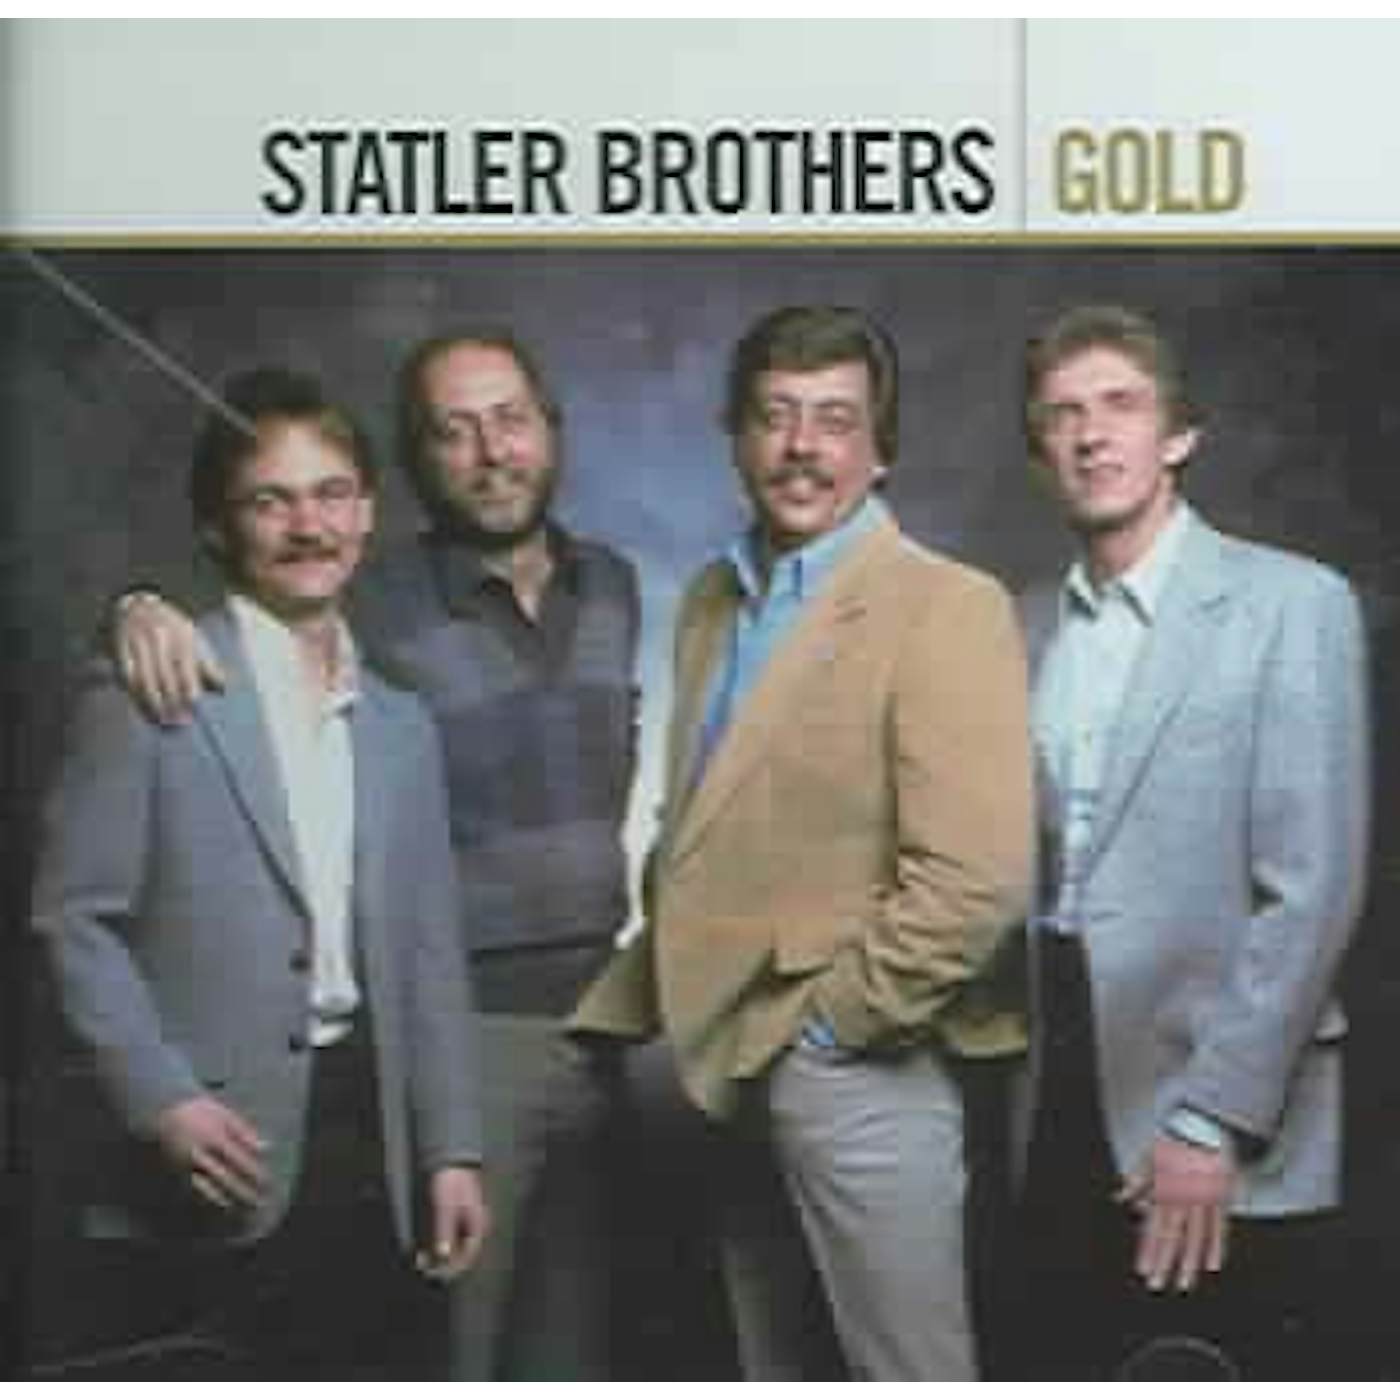 The Statler Brothers GOLD CD